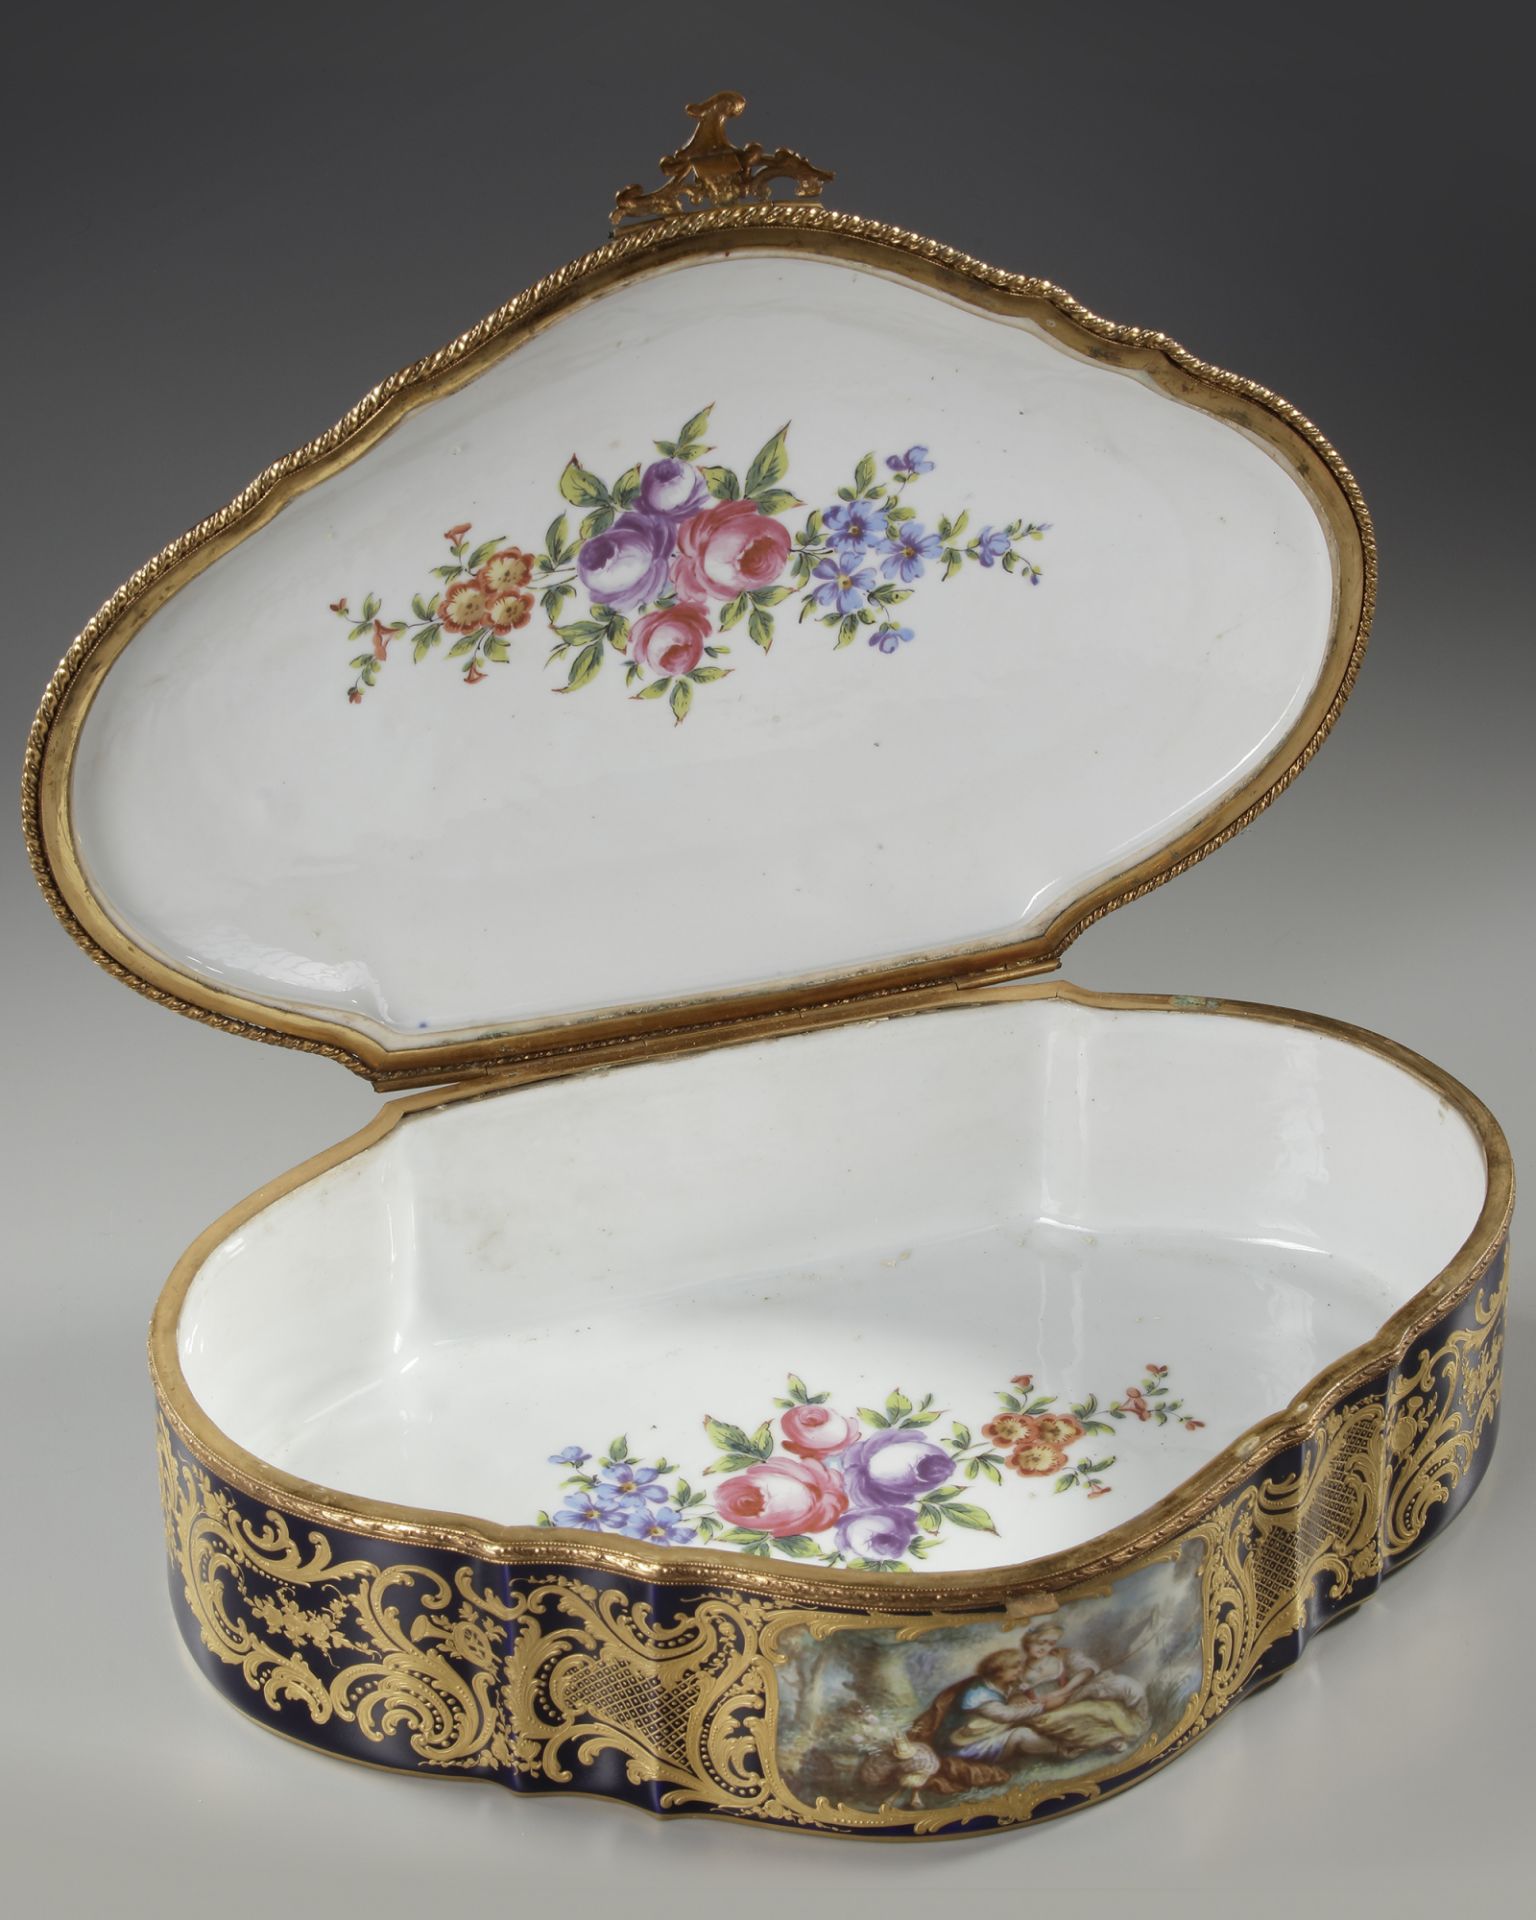 A PORCELAIN JEWELRY BOX, 19TH CENTURY - Image 3 of 5